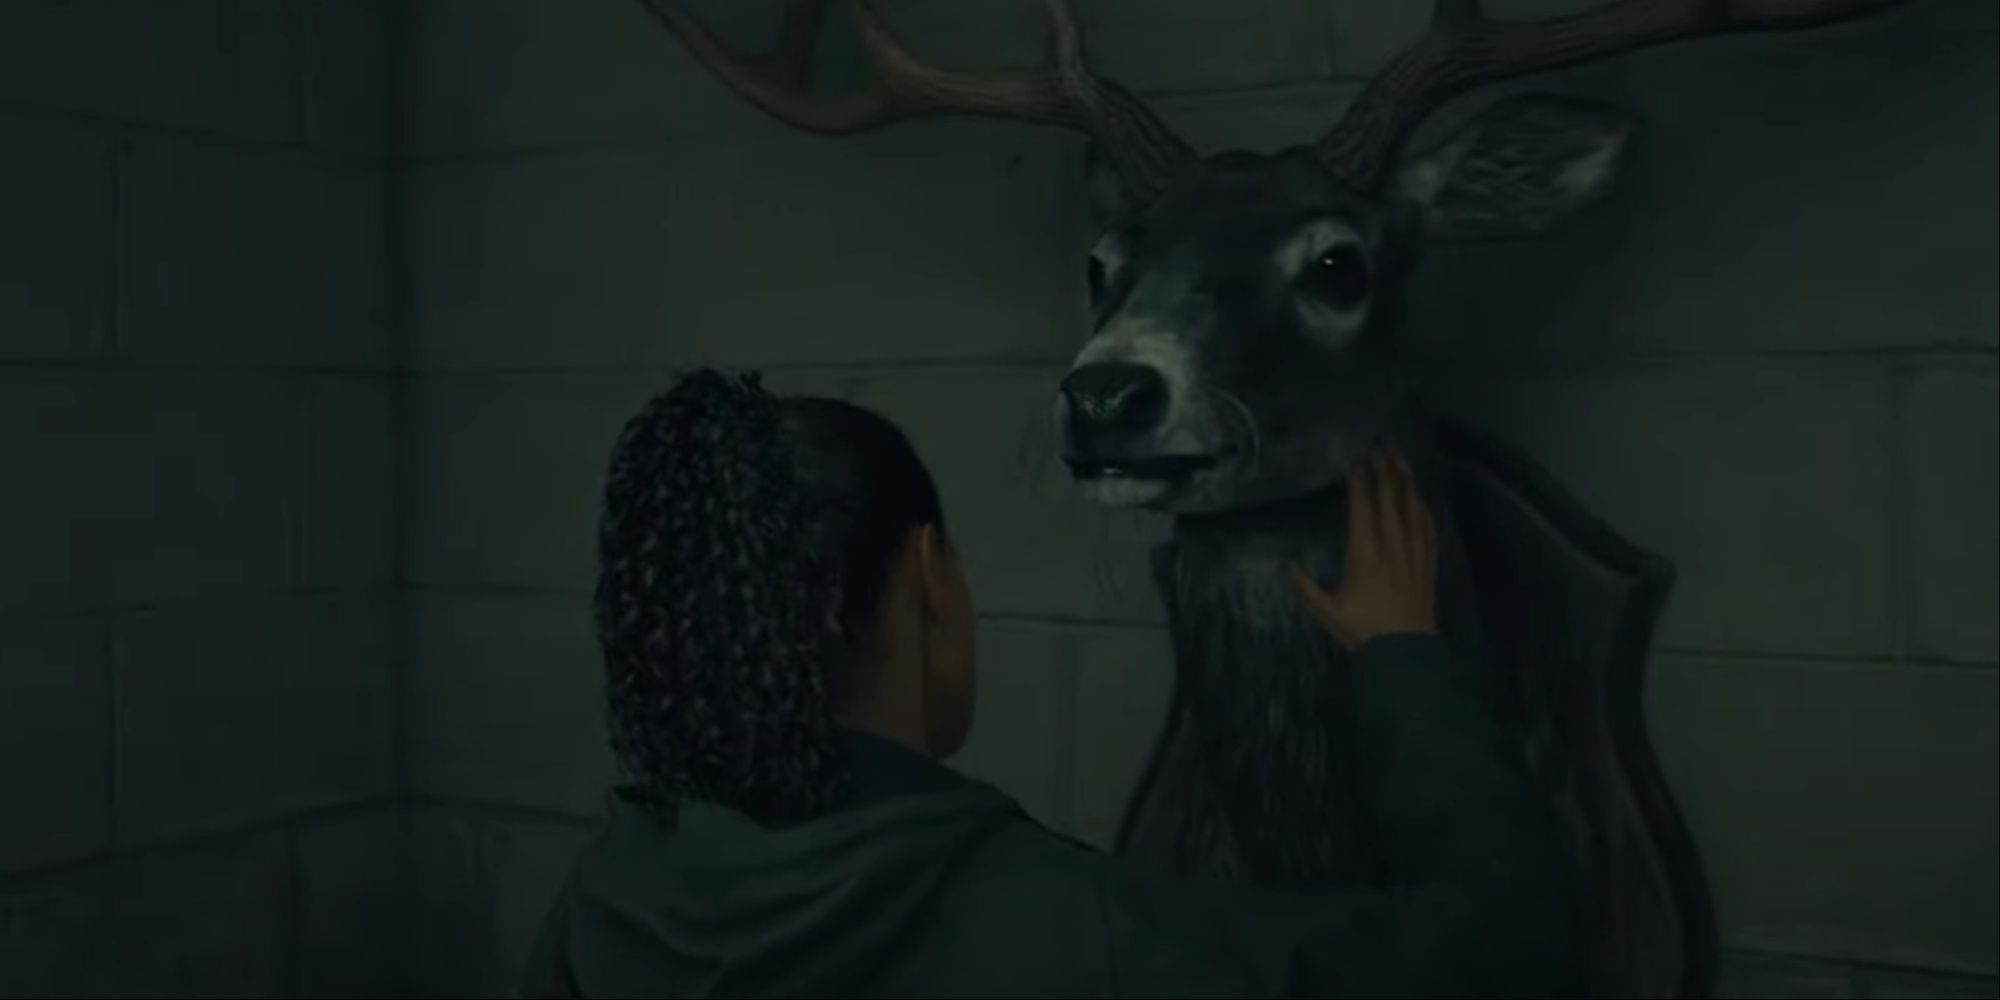 Saga gently petting the head of deer mounted on a wall as a hunter's trophy.